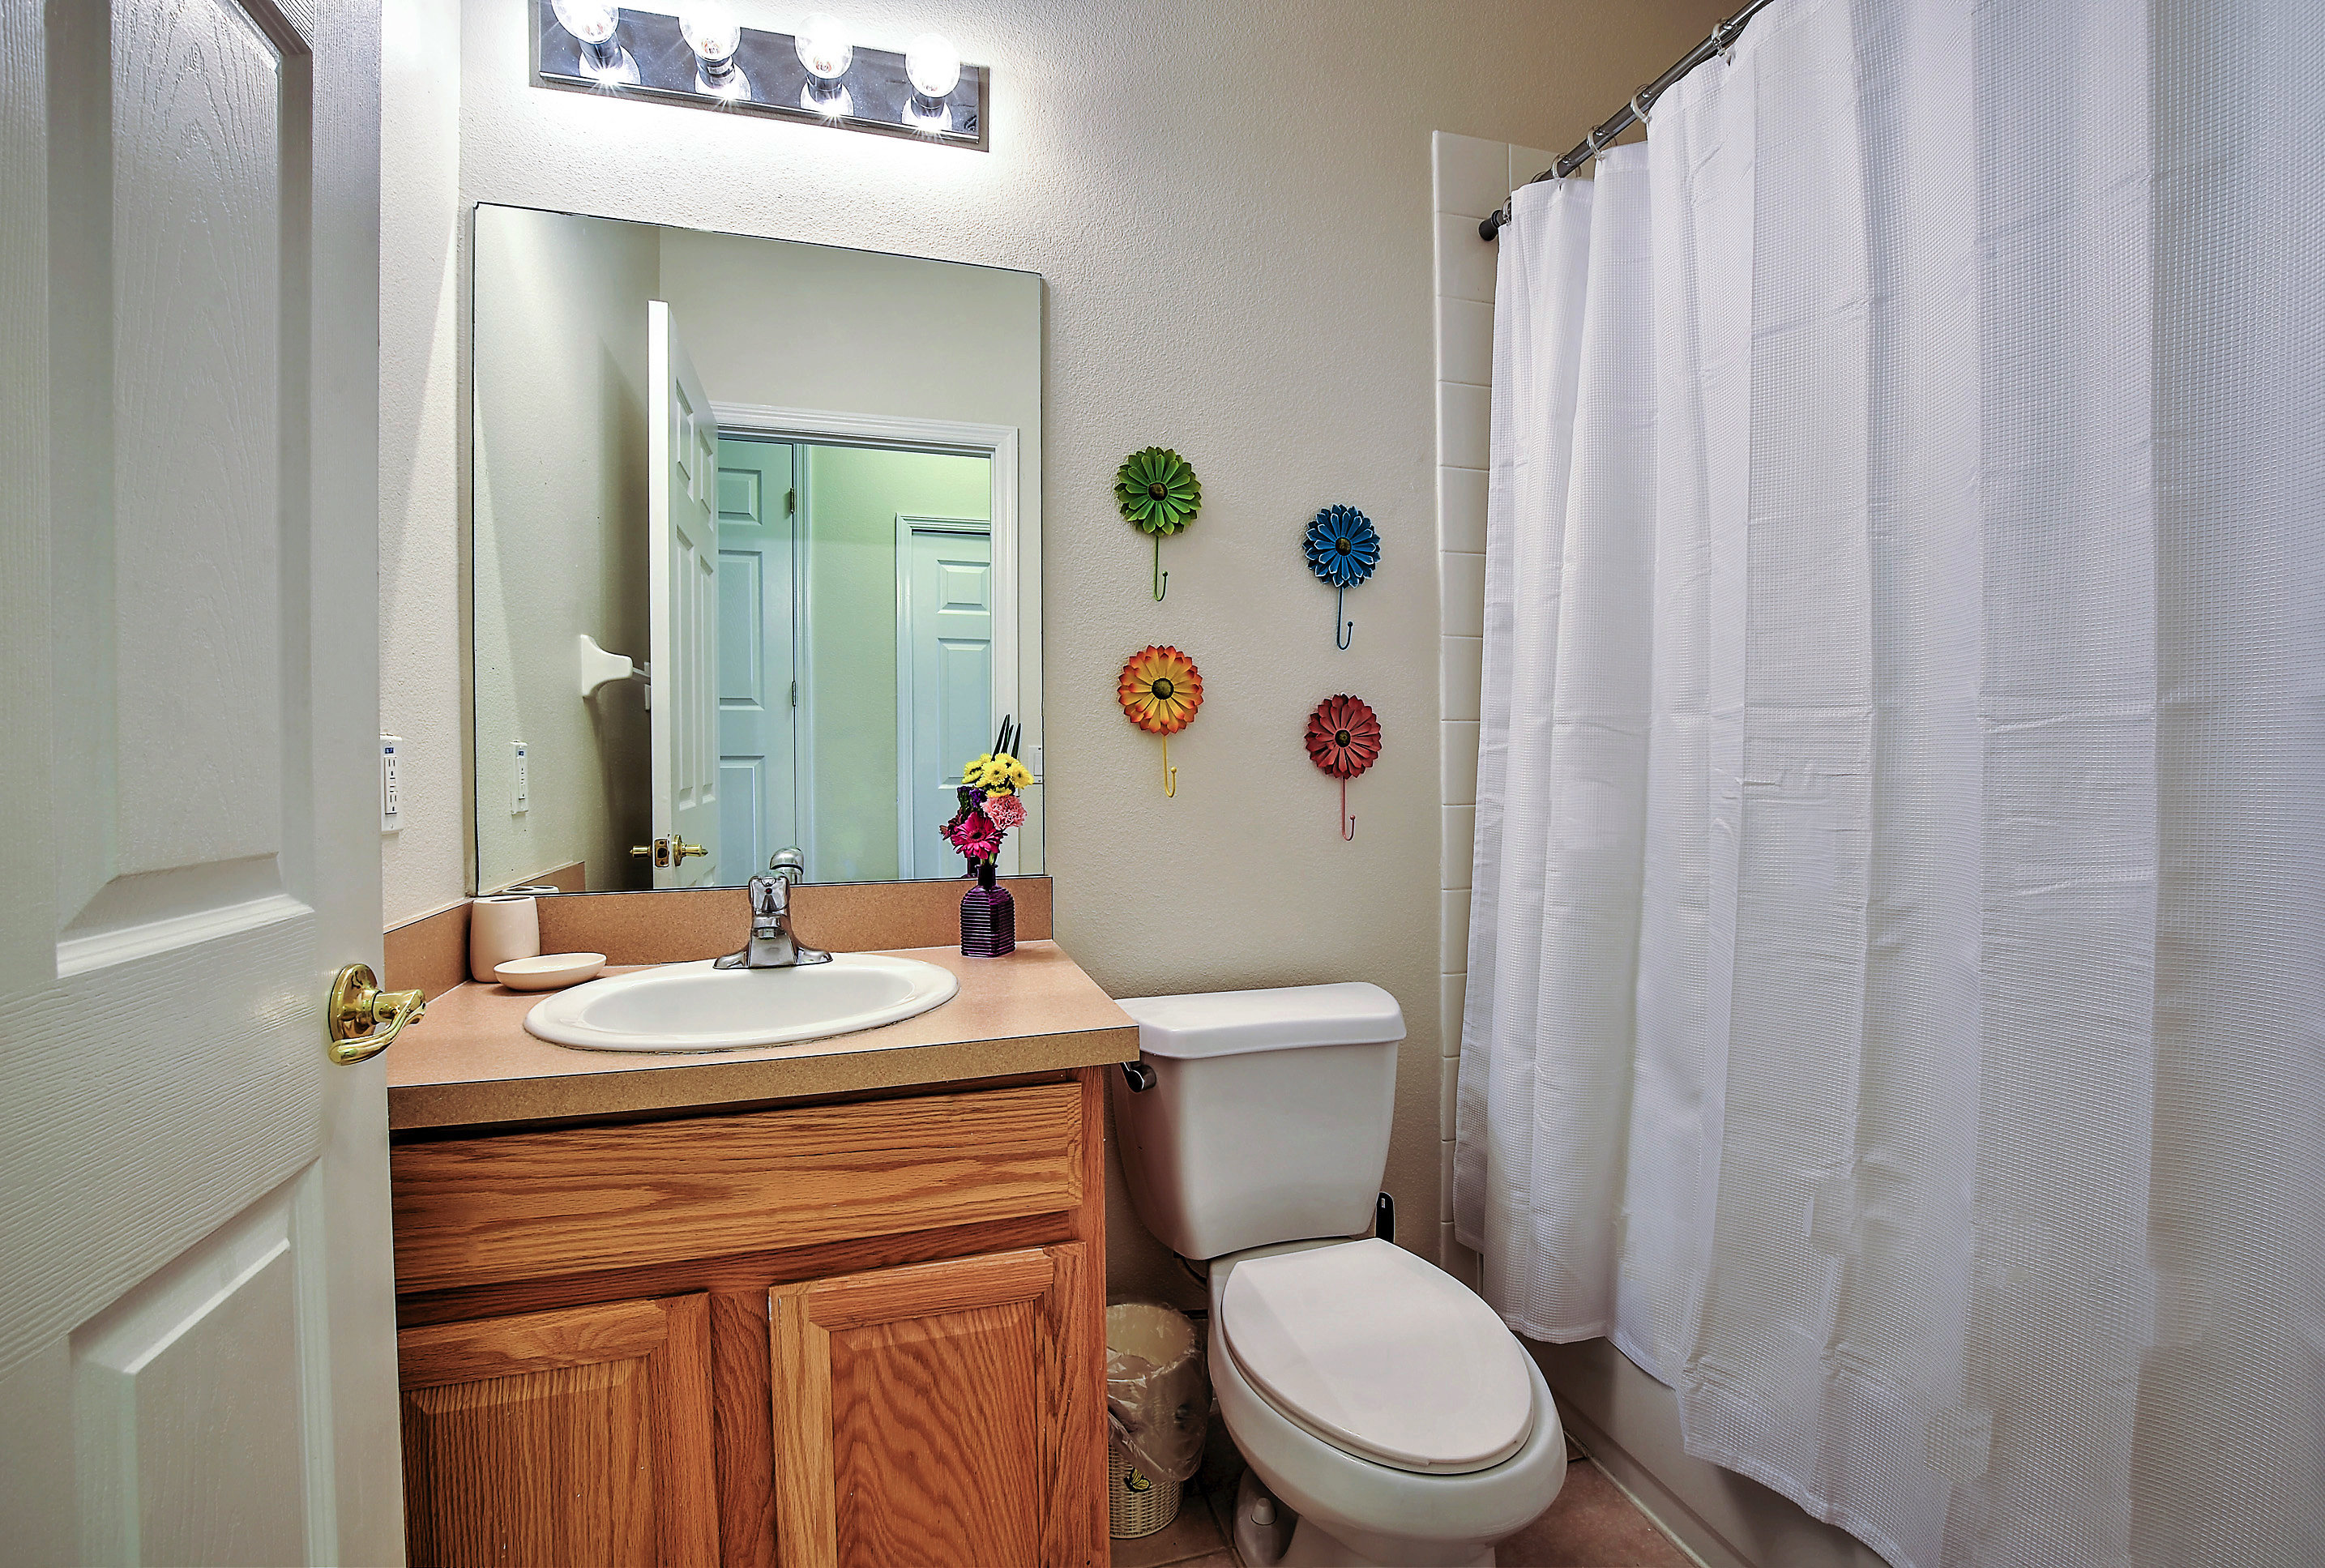 Picture Gallery. Shared Bathroom